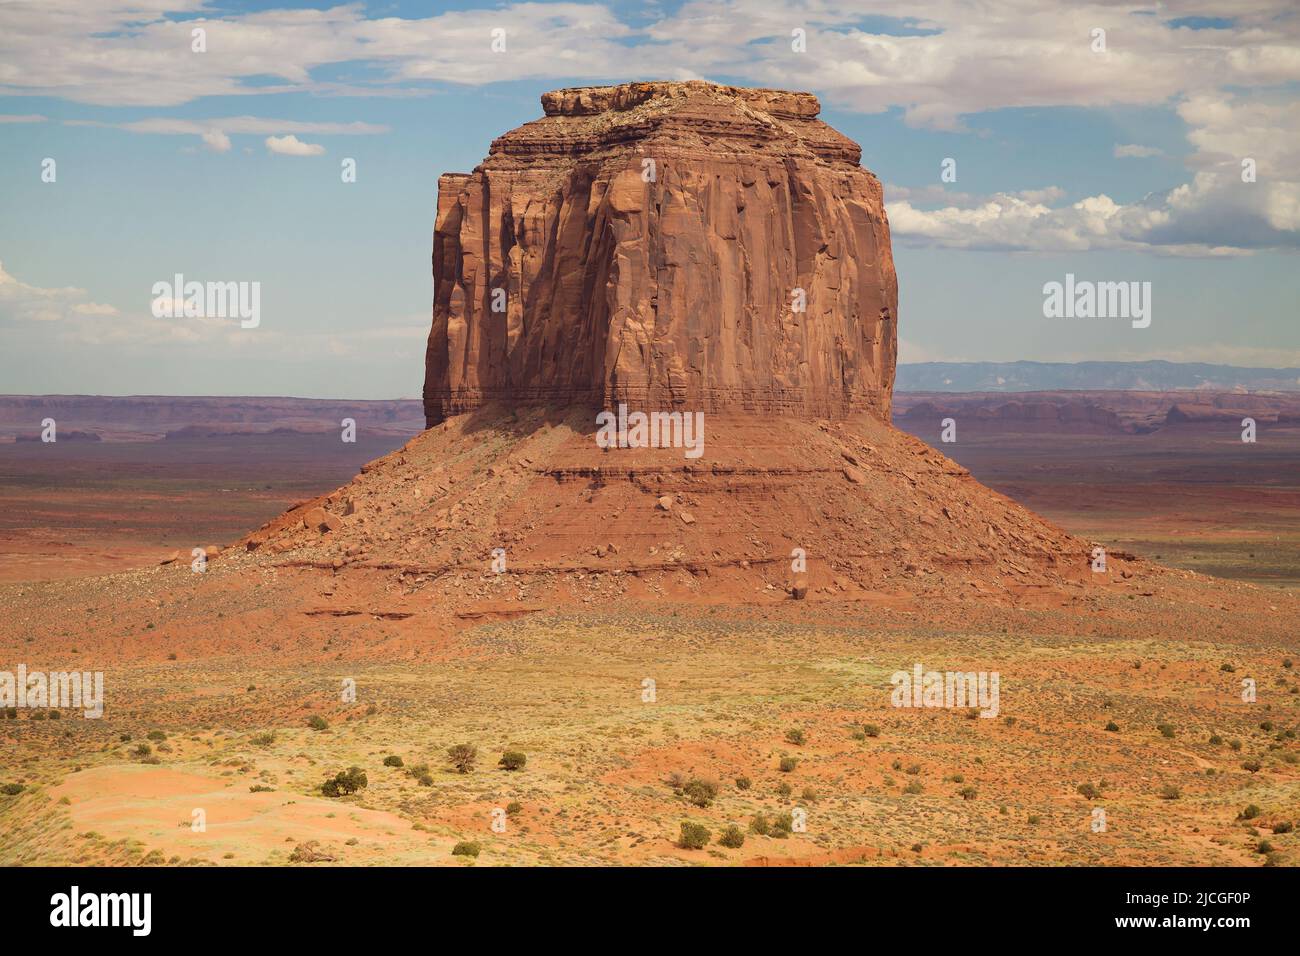 Merrick Butte from Lookout Point in Monument Valley, Arizona, United States. Stock Photo